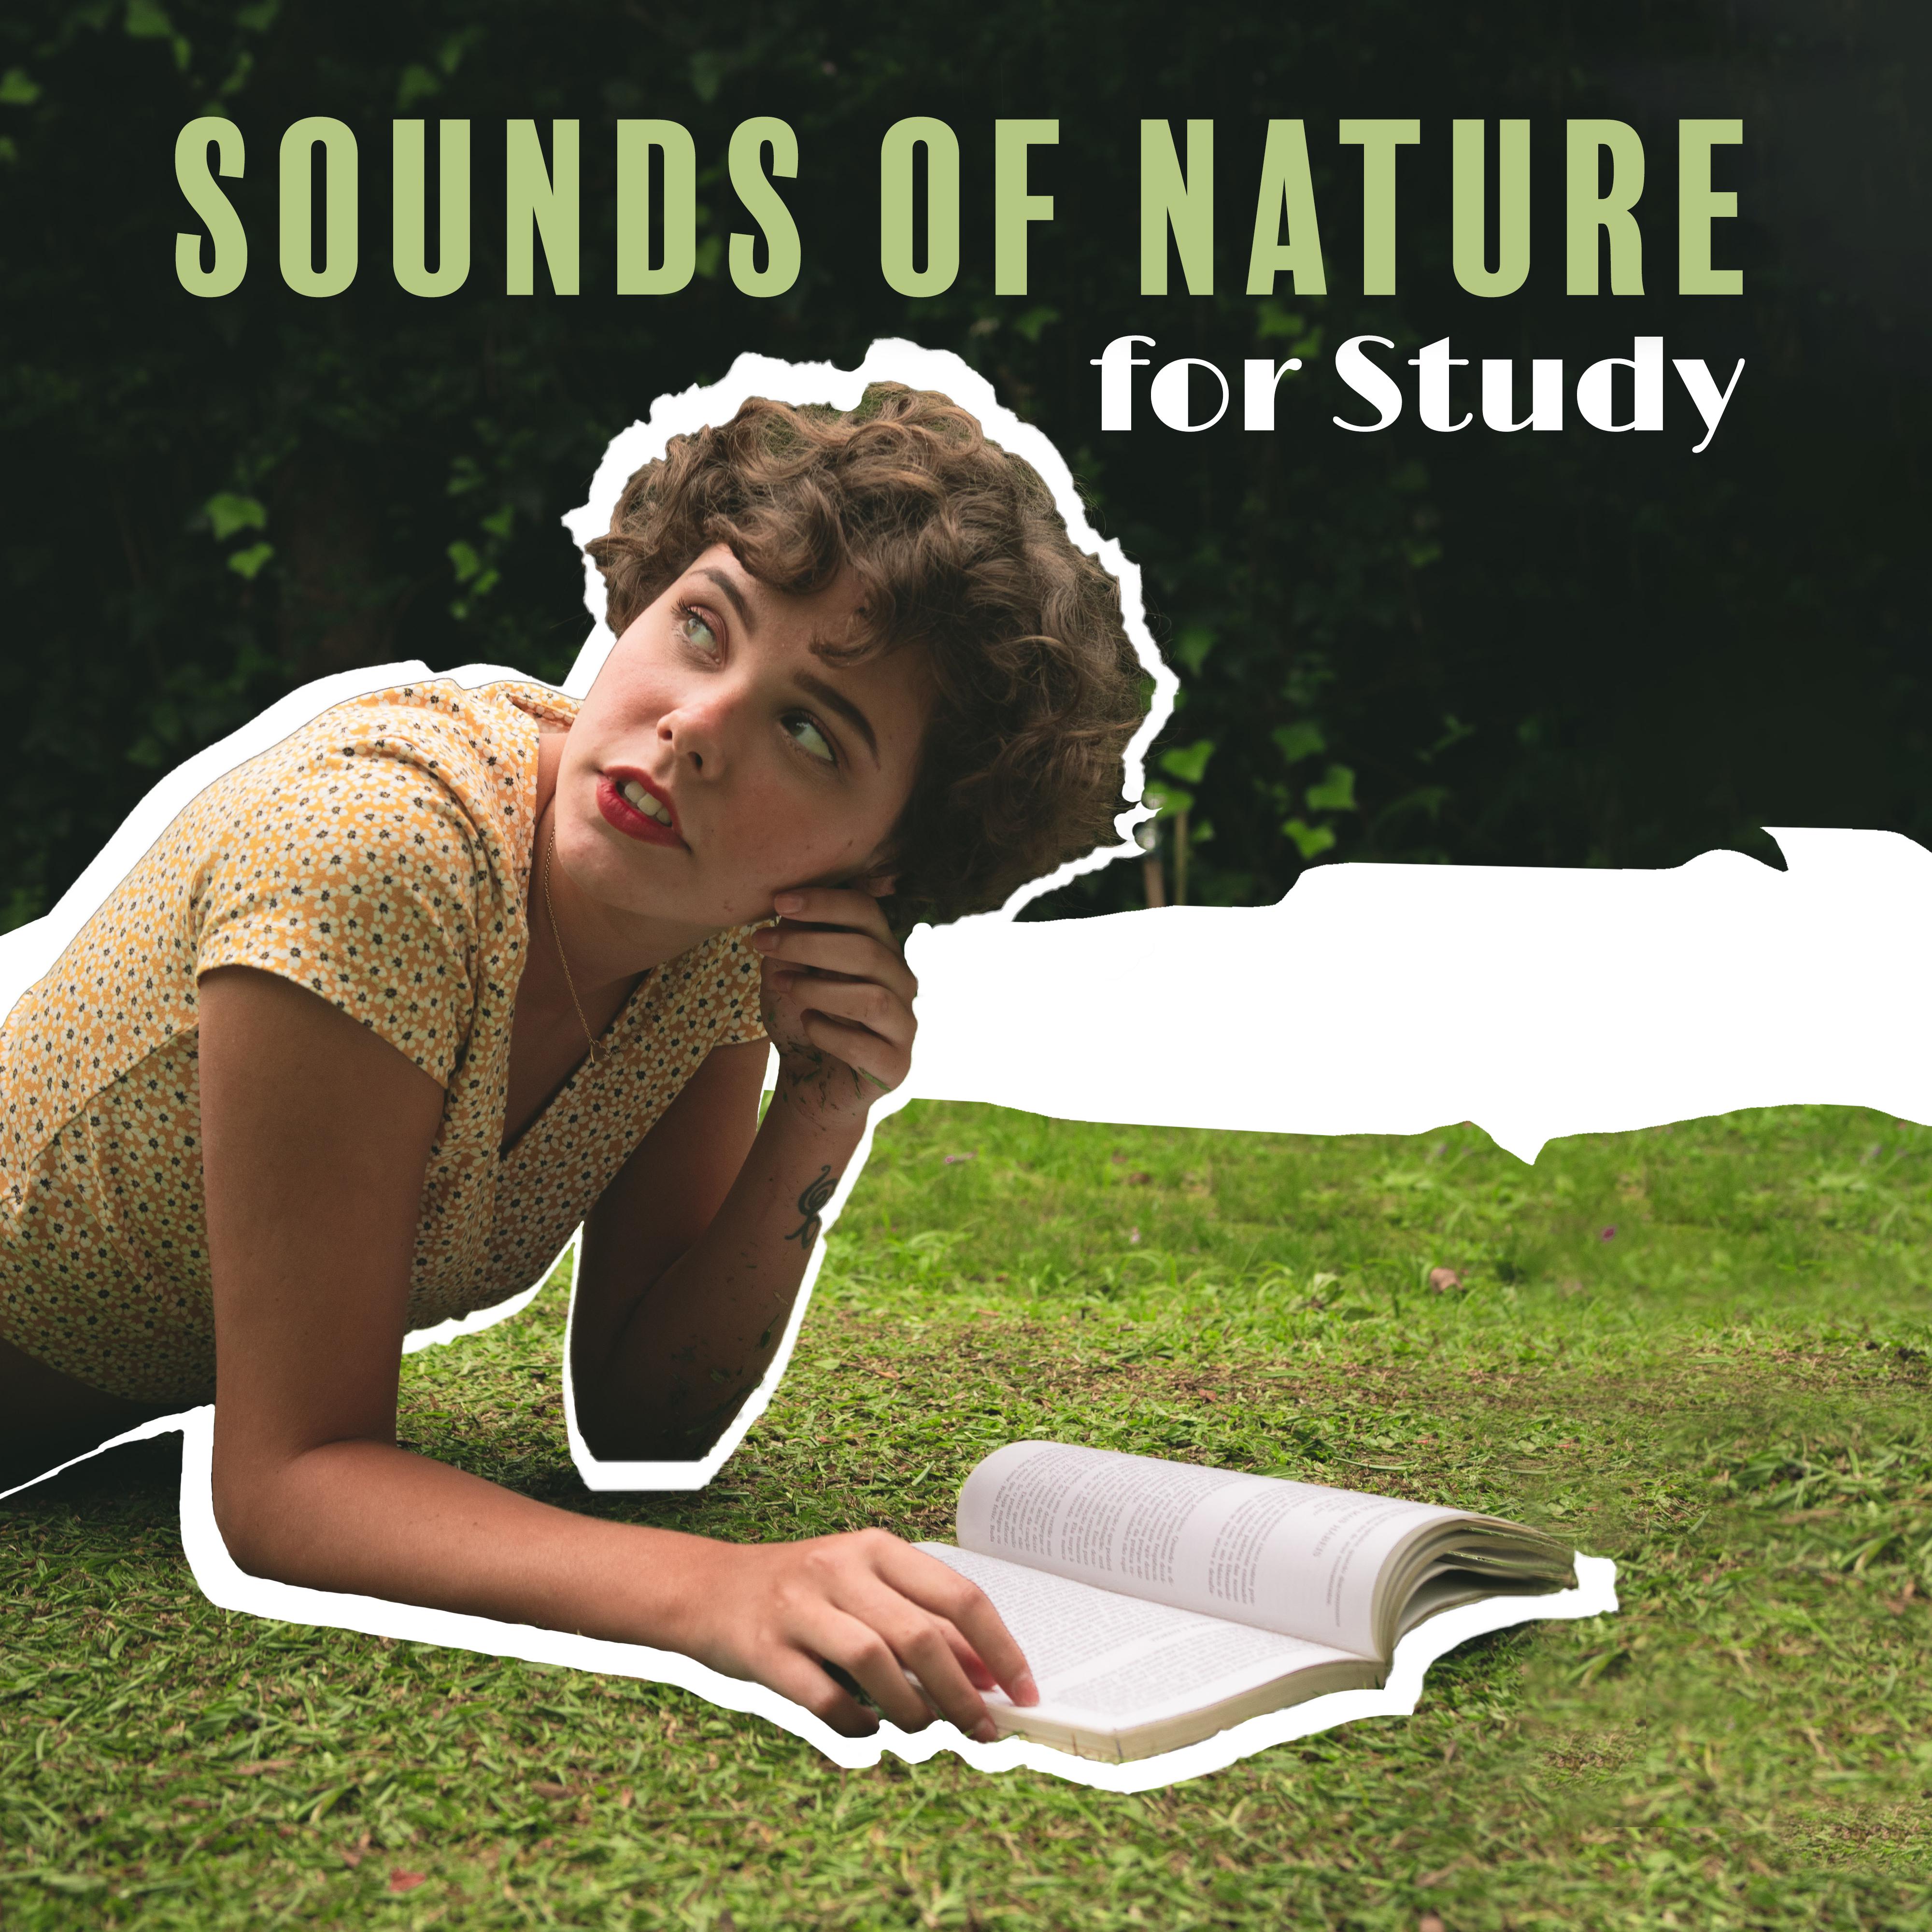 Sounds of Nature for Study – Music for Mind, Deep Concentration, Reduce Stress, Calm Down, Deeper Focus, Brain Power